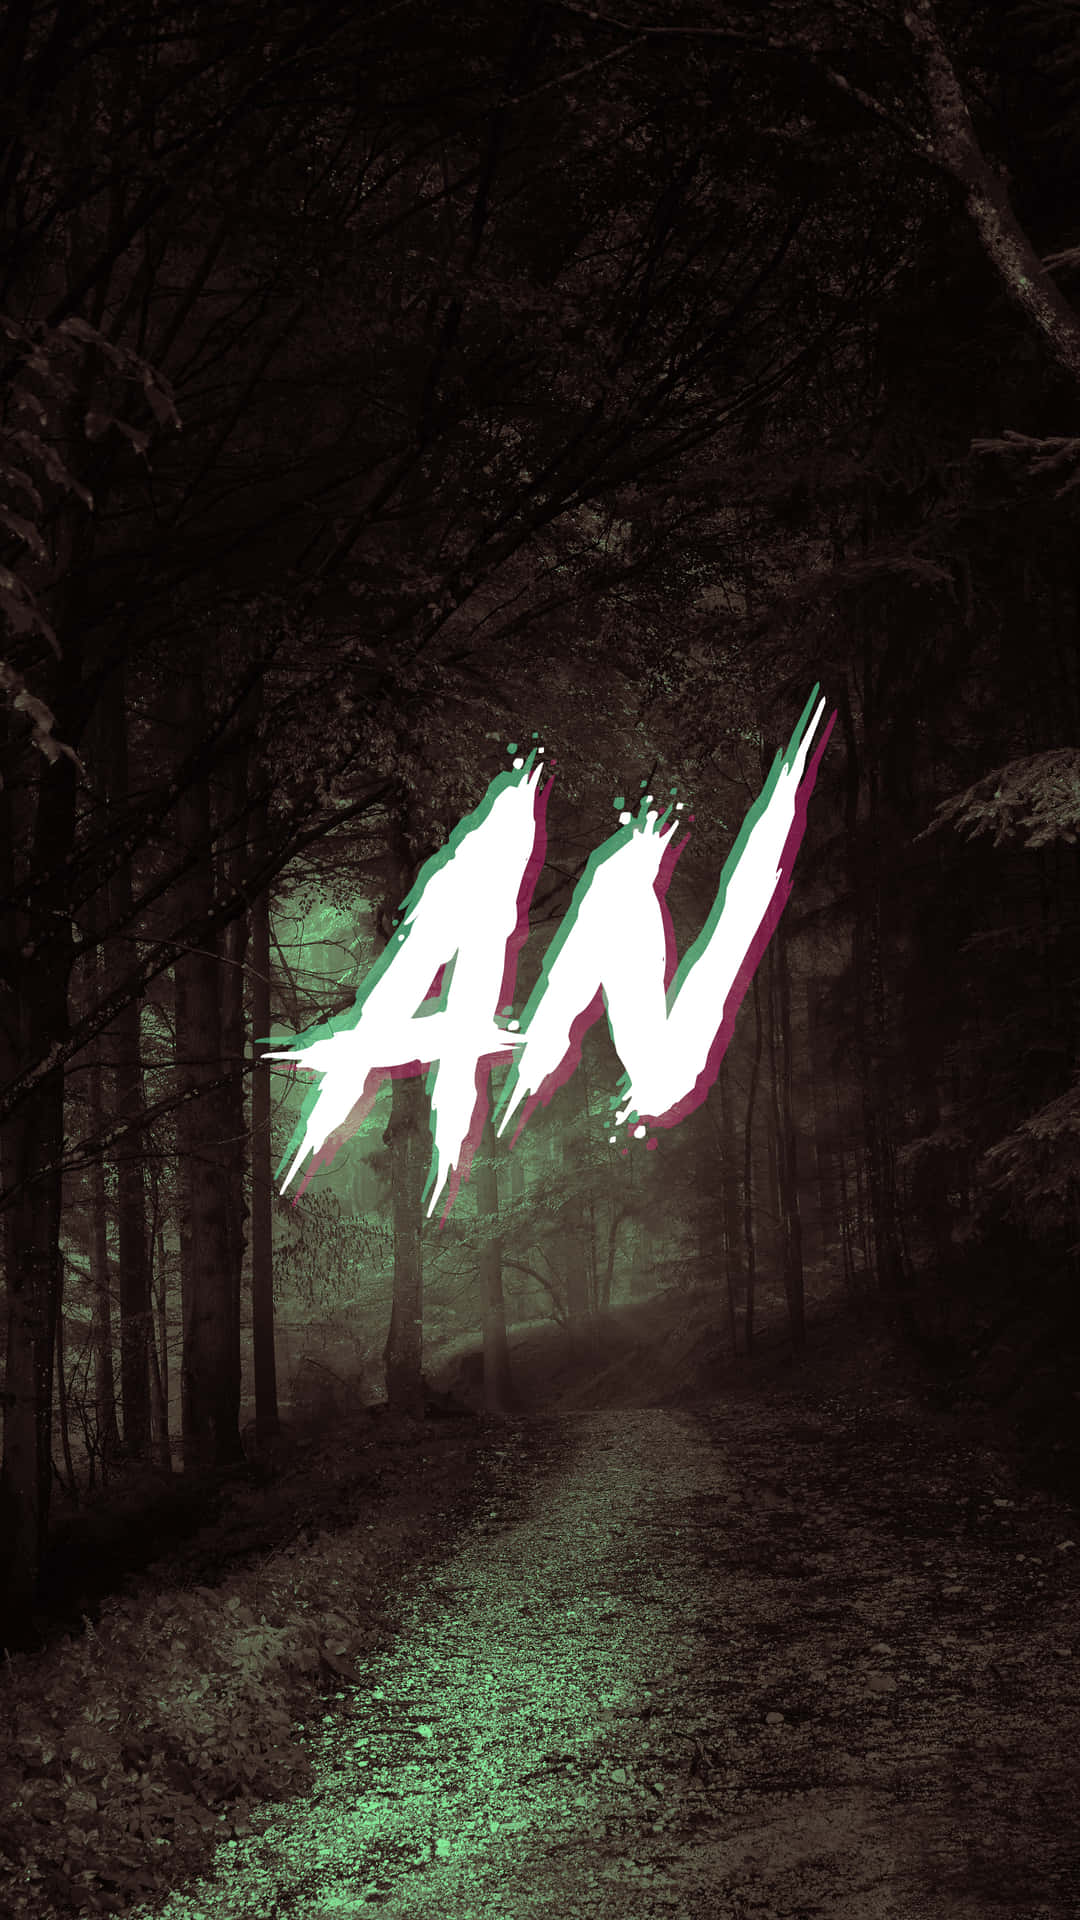 AN On Creepy Forest Wallpaper